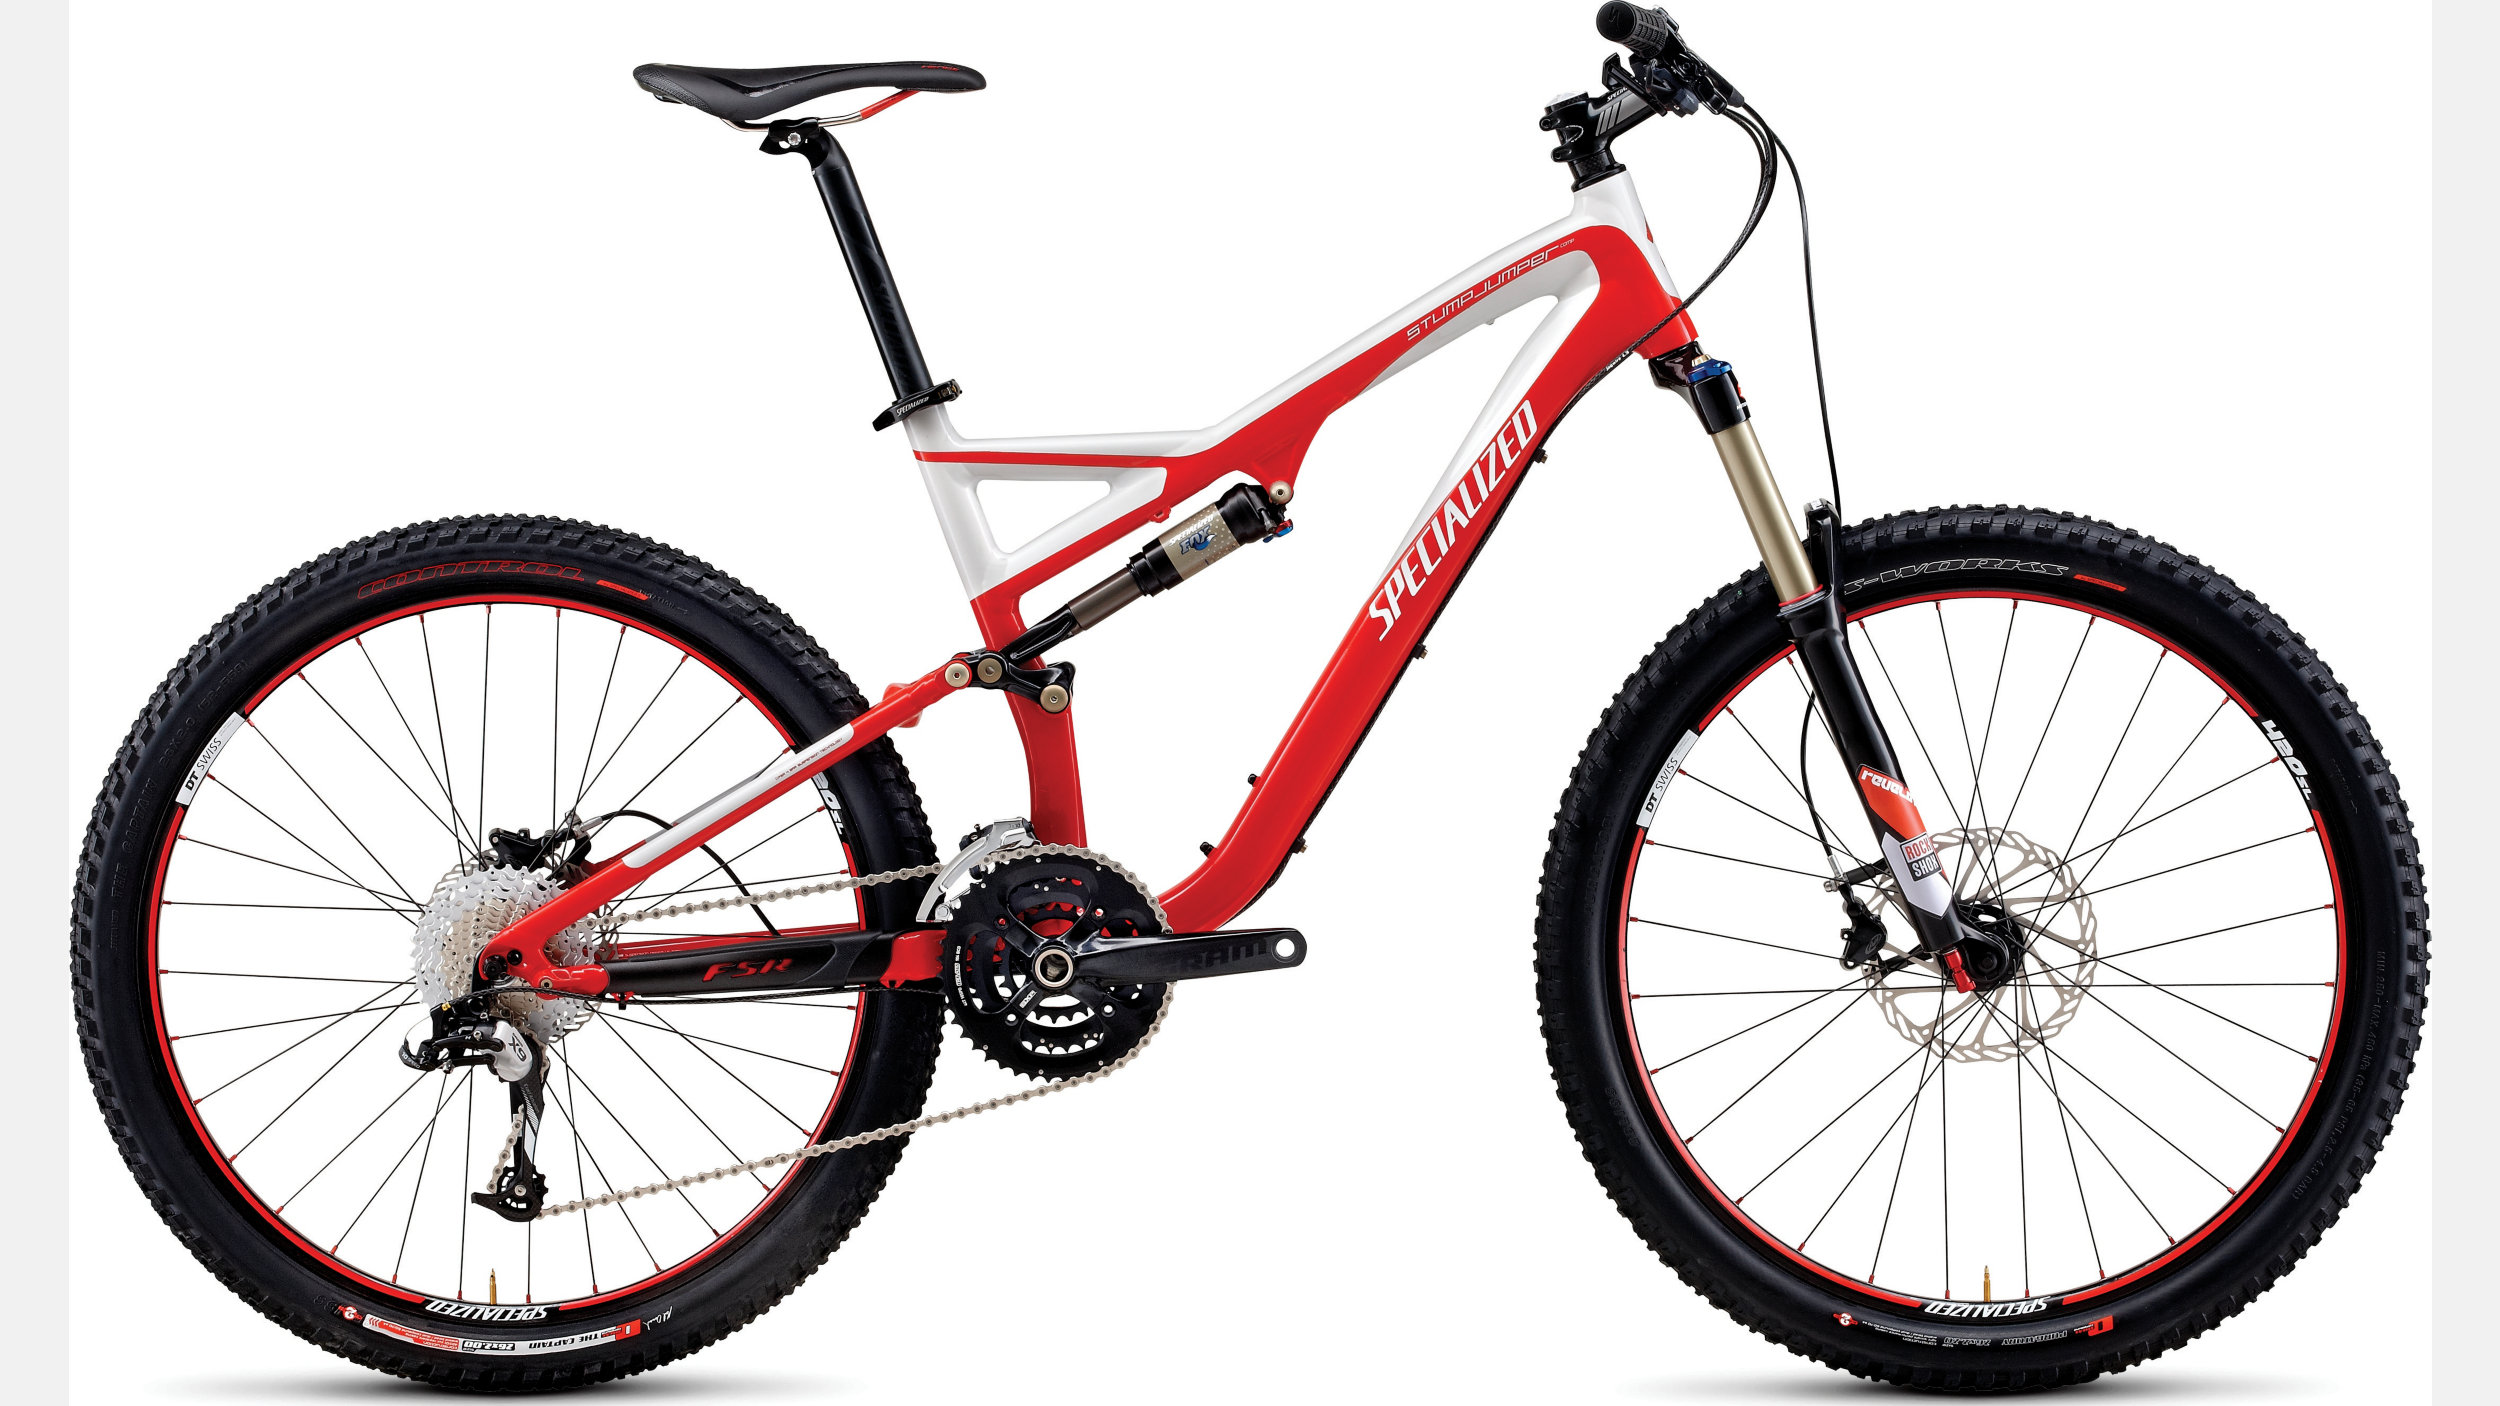 Specialized Stumpjumper Serial Numbers